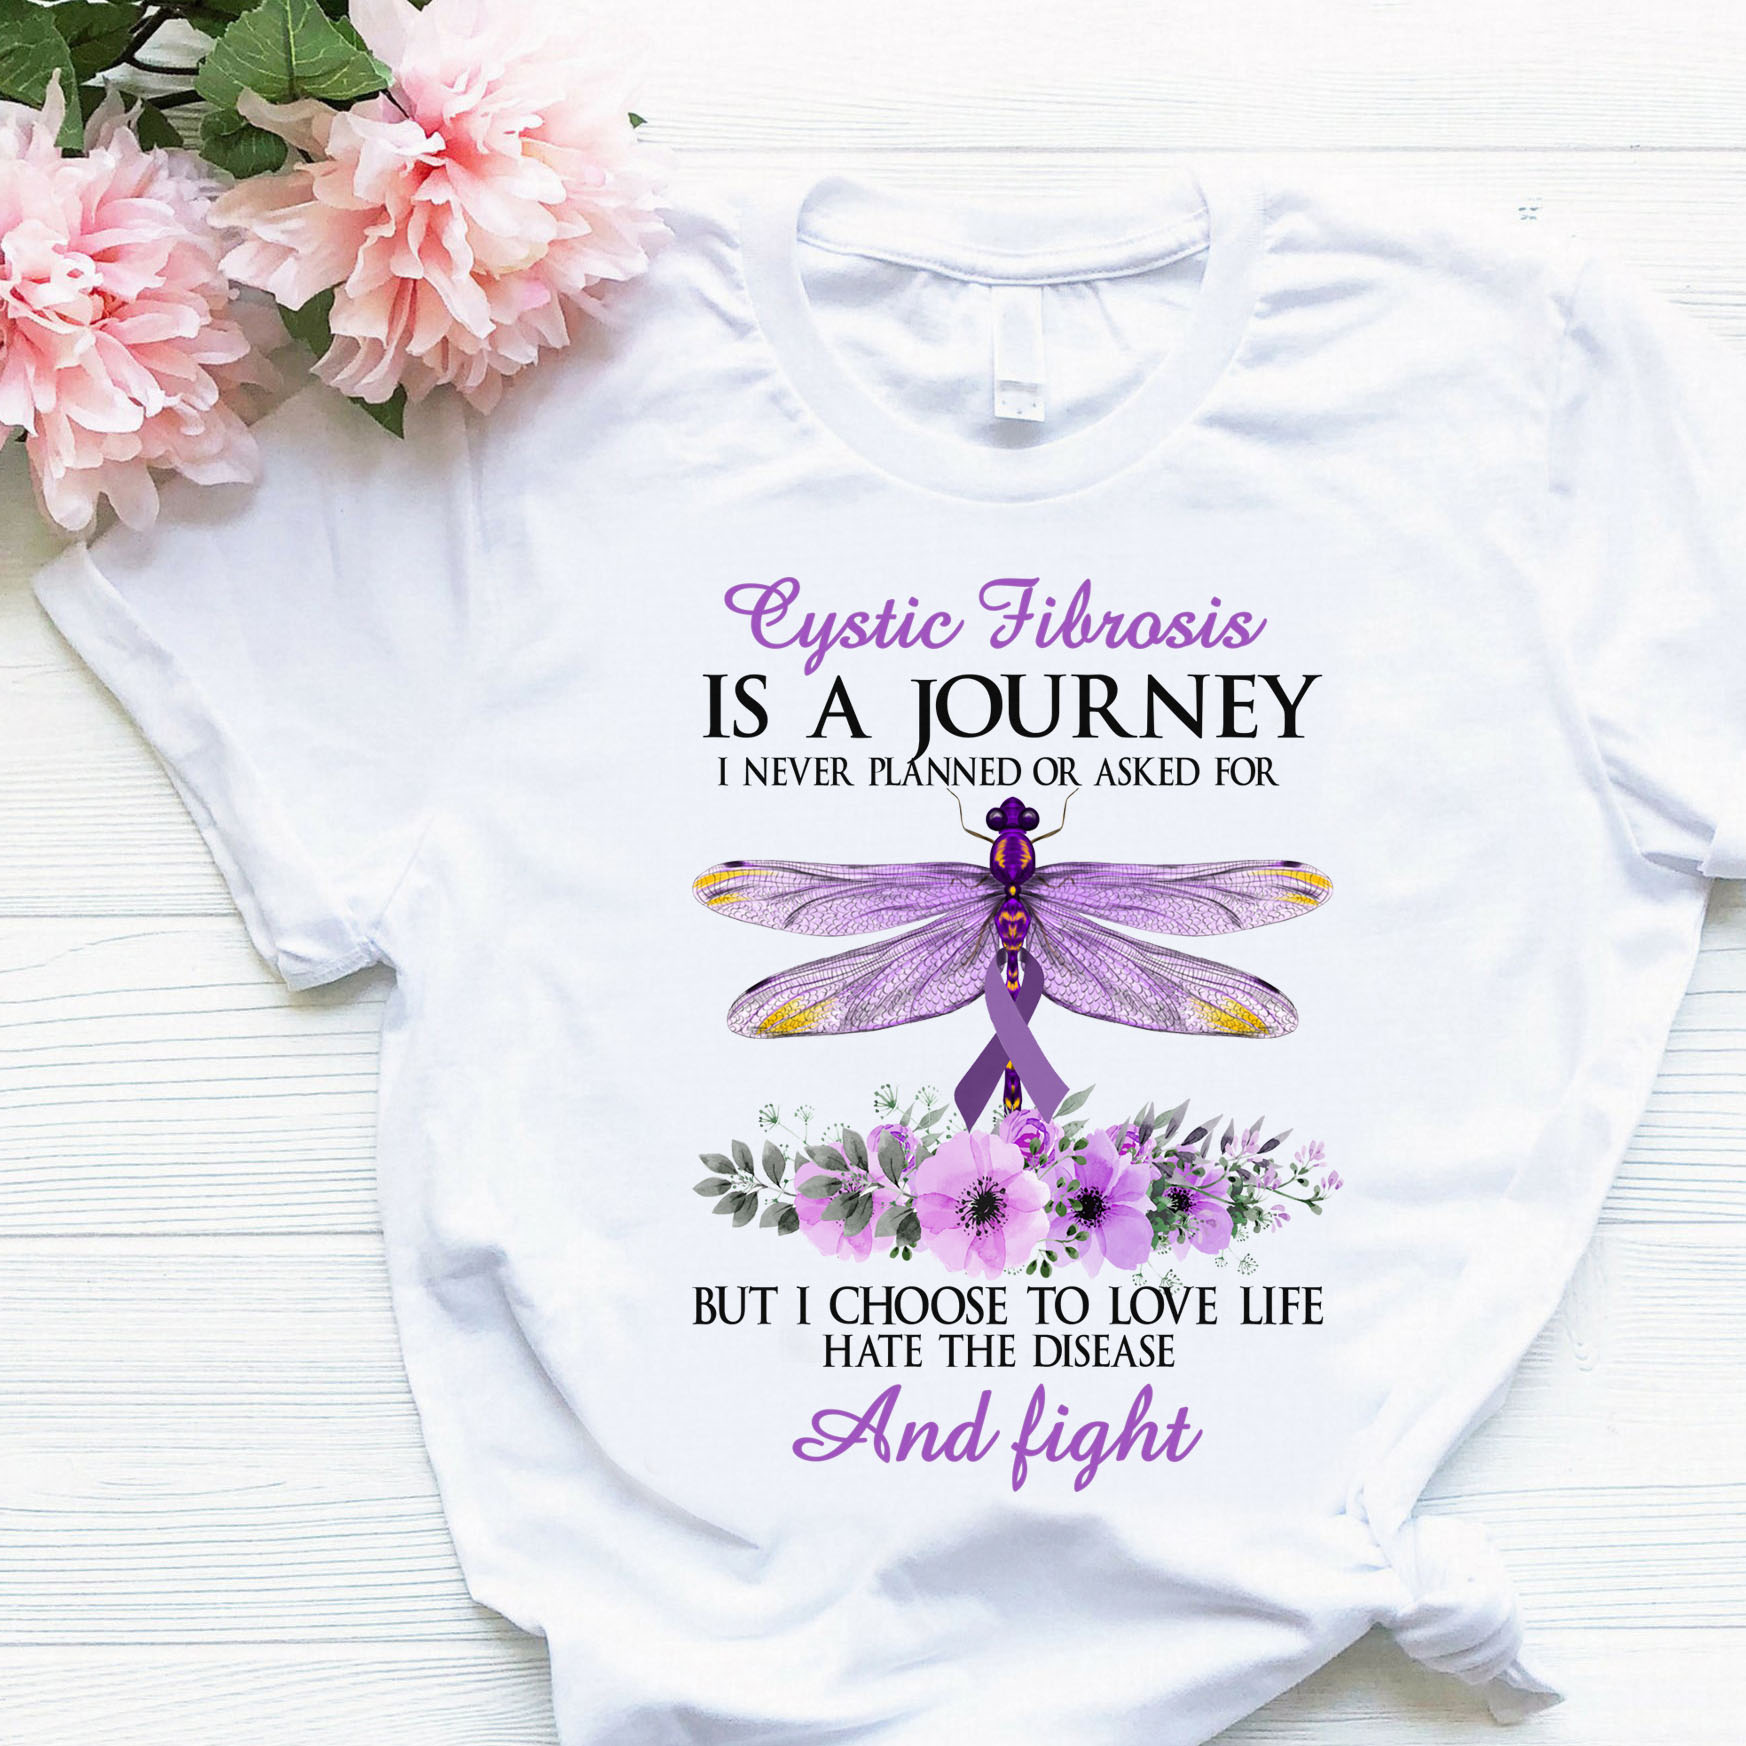 Cystic Fibrosis is a journey I never planned or asked for but I choose to love life hate the disease and fight - Dragon fly